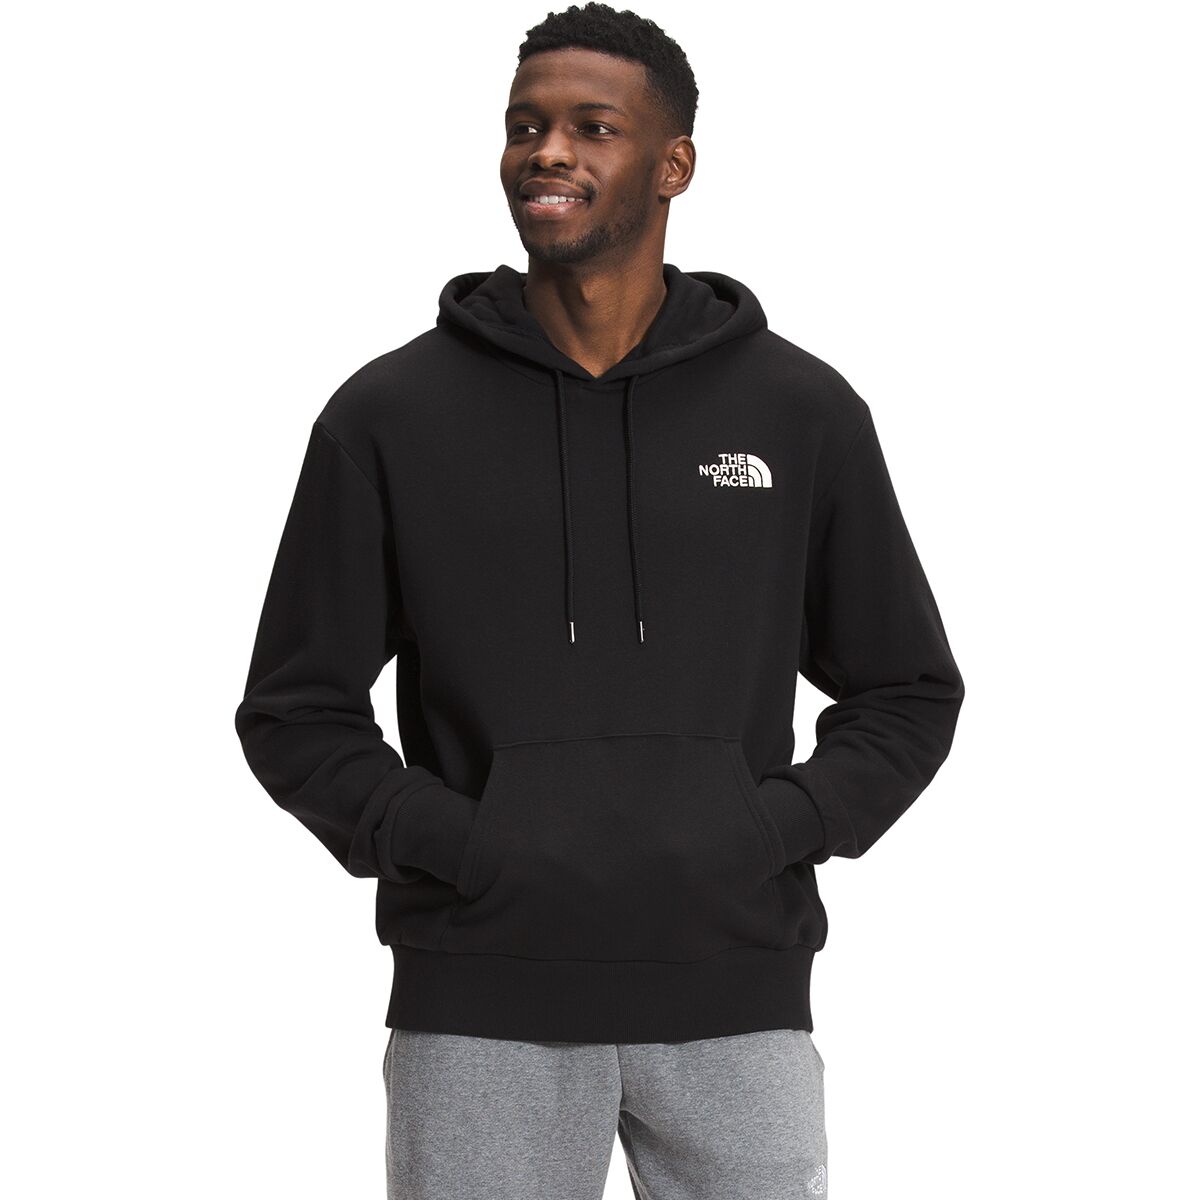 The North Face Simple Logo Hoodie - Men's